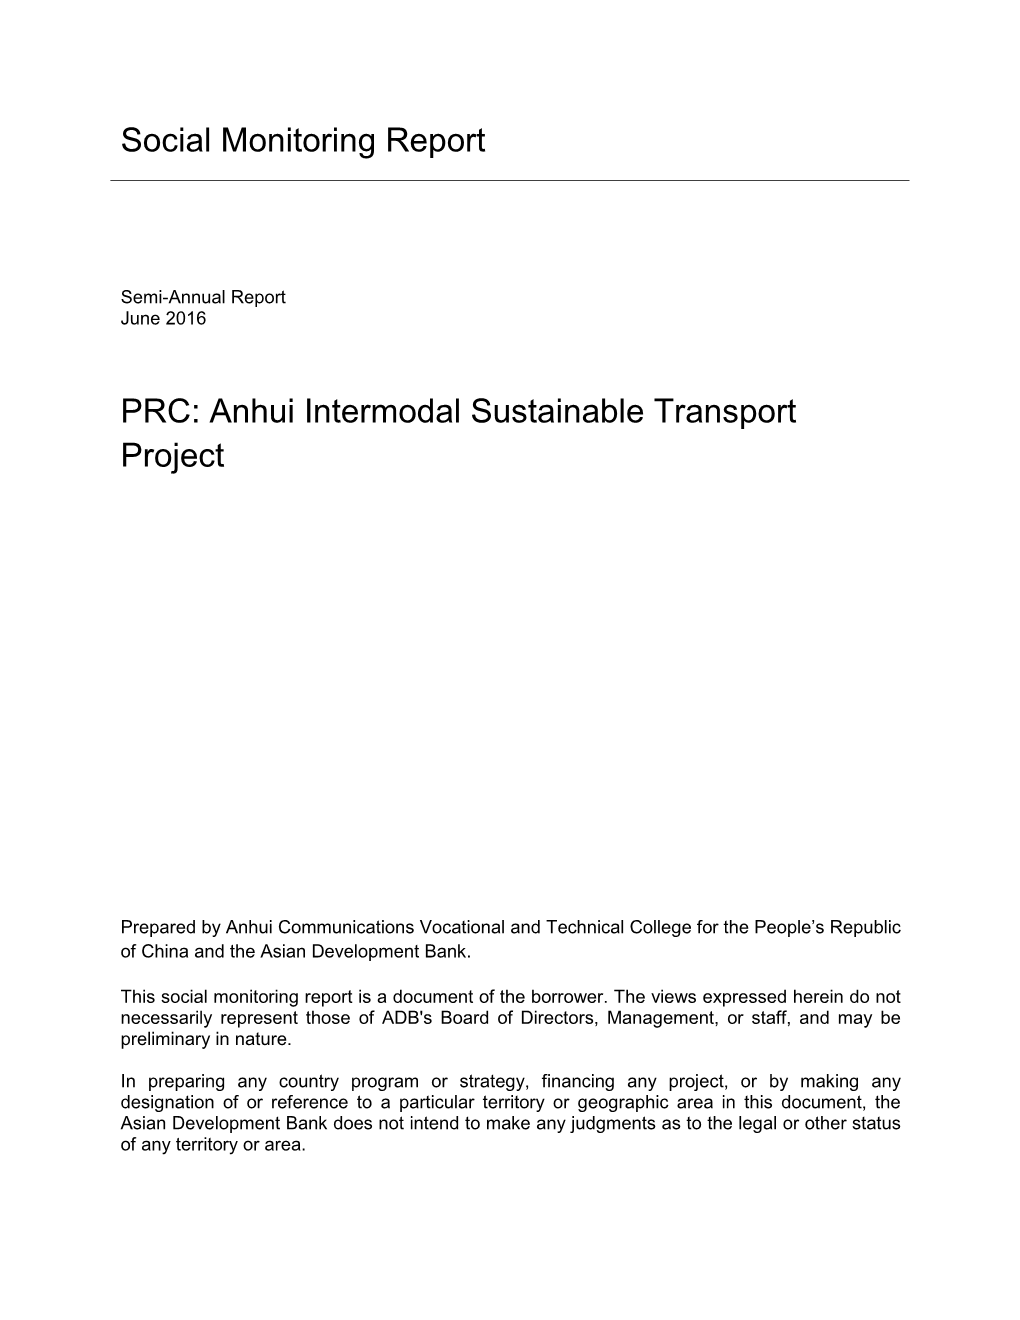 Anhui Intermodal Sustainable Transport Project